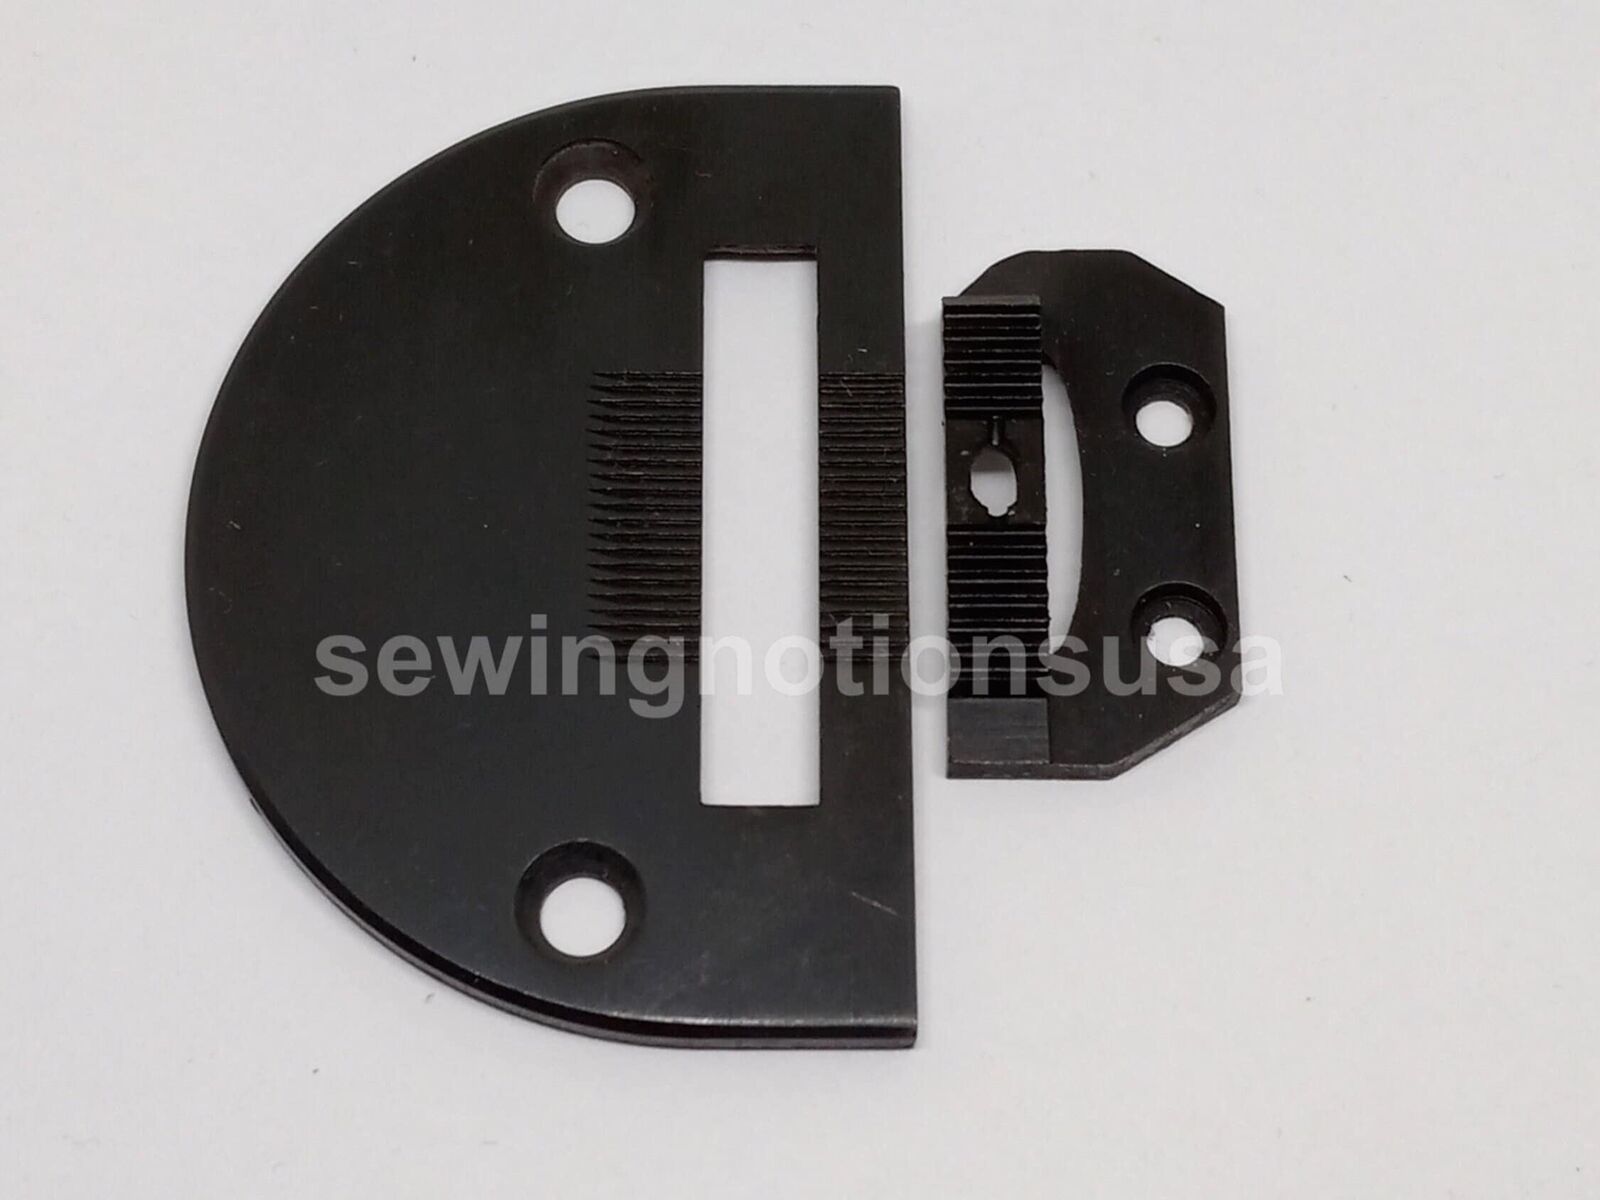 Consew 206RB Walking Foot Sewing Machine Needle Plate and Feeder Set 18030 & - $12.95